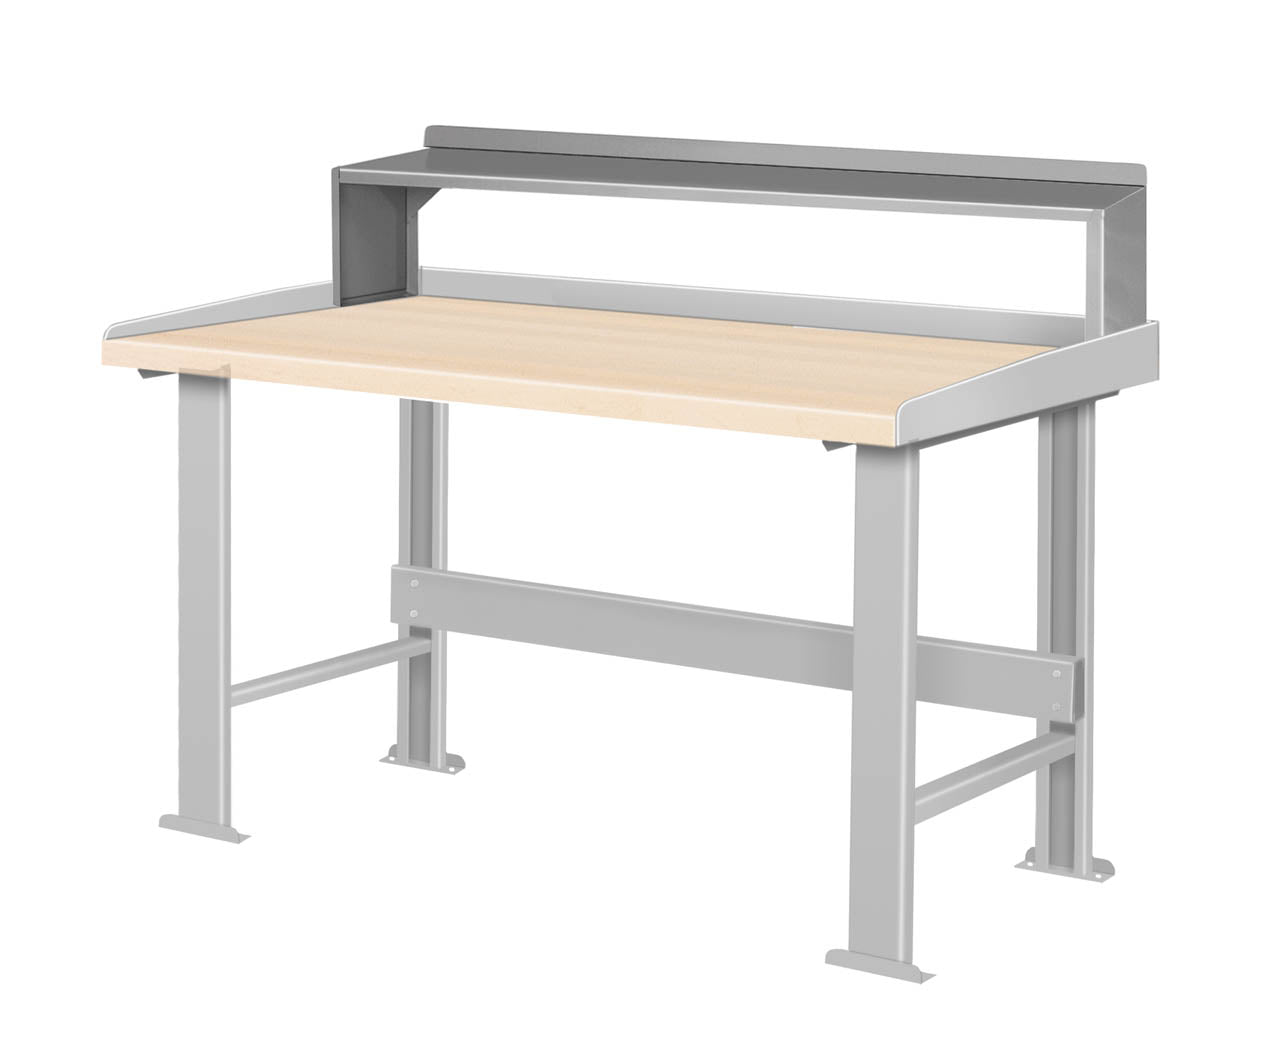 36"W Bench Riser for Pucel Work Benches